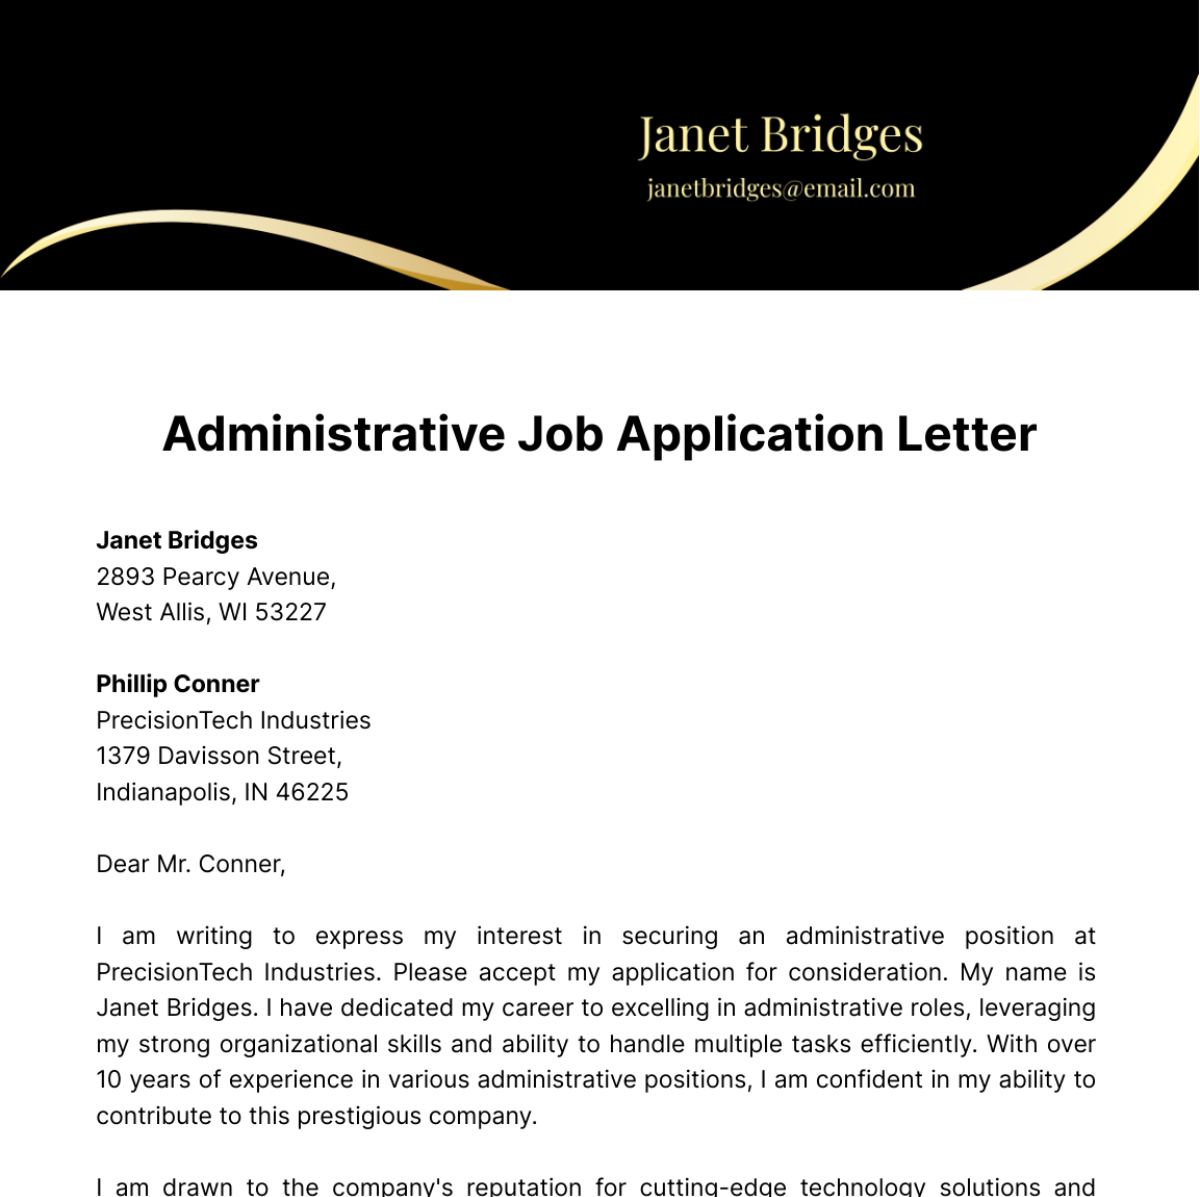 Administrative Job Application Letter  Template